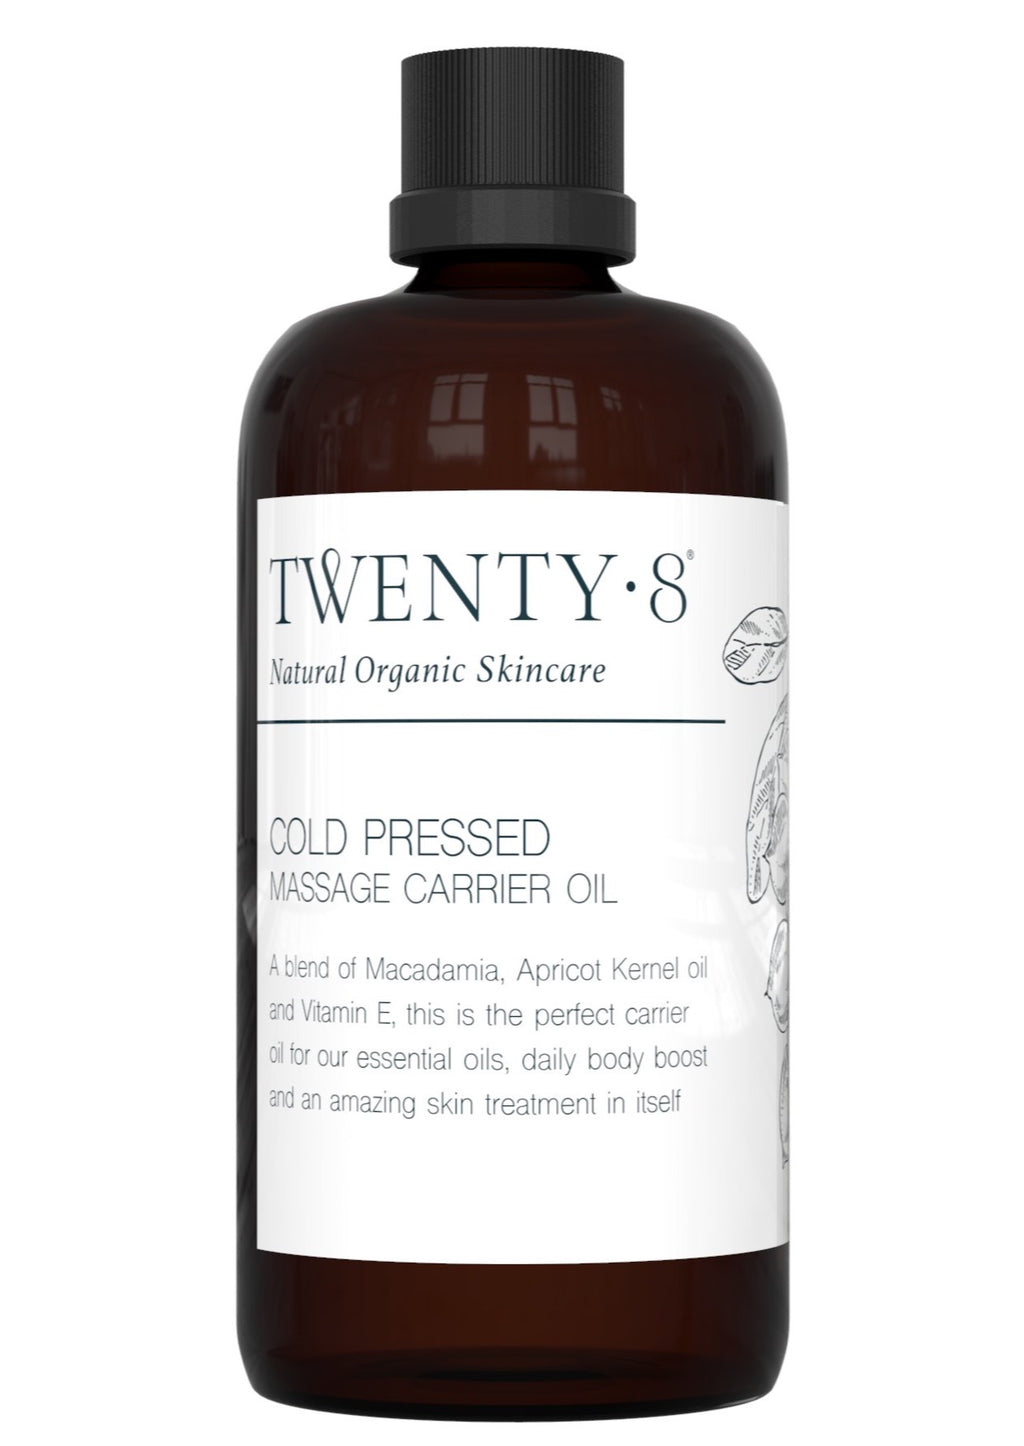 Cold Pressed Massage Carrier Oil, by Twenty8  A cold pressed blend of Macadamia, Apricot Kernel oil and Vitamin E, this is the perfect carrier oil an amazing skin treatment in itself.  It is the perfect base to add your essential oil synergy blends to for your daily mind and skin boost.